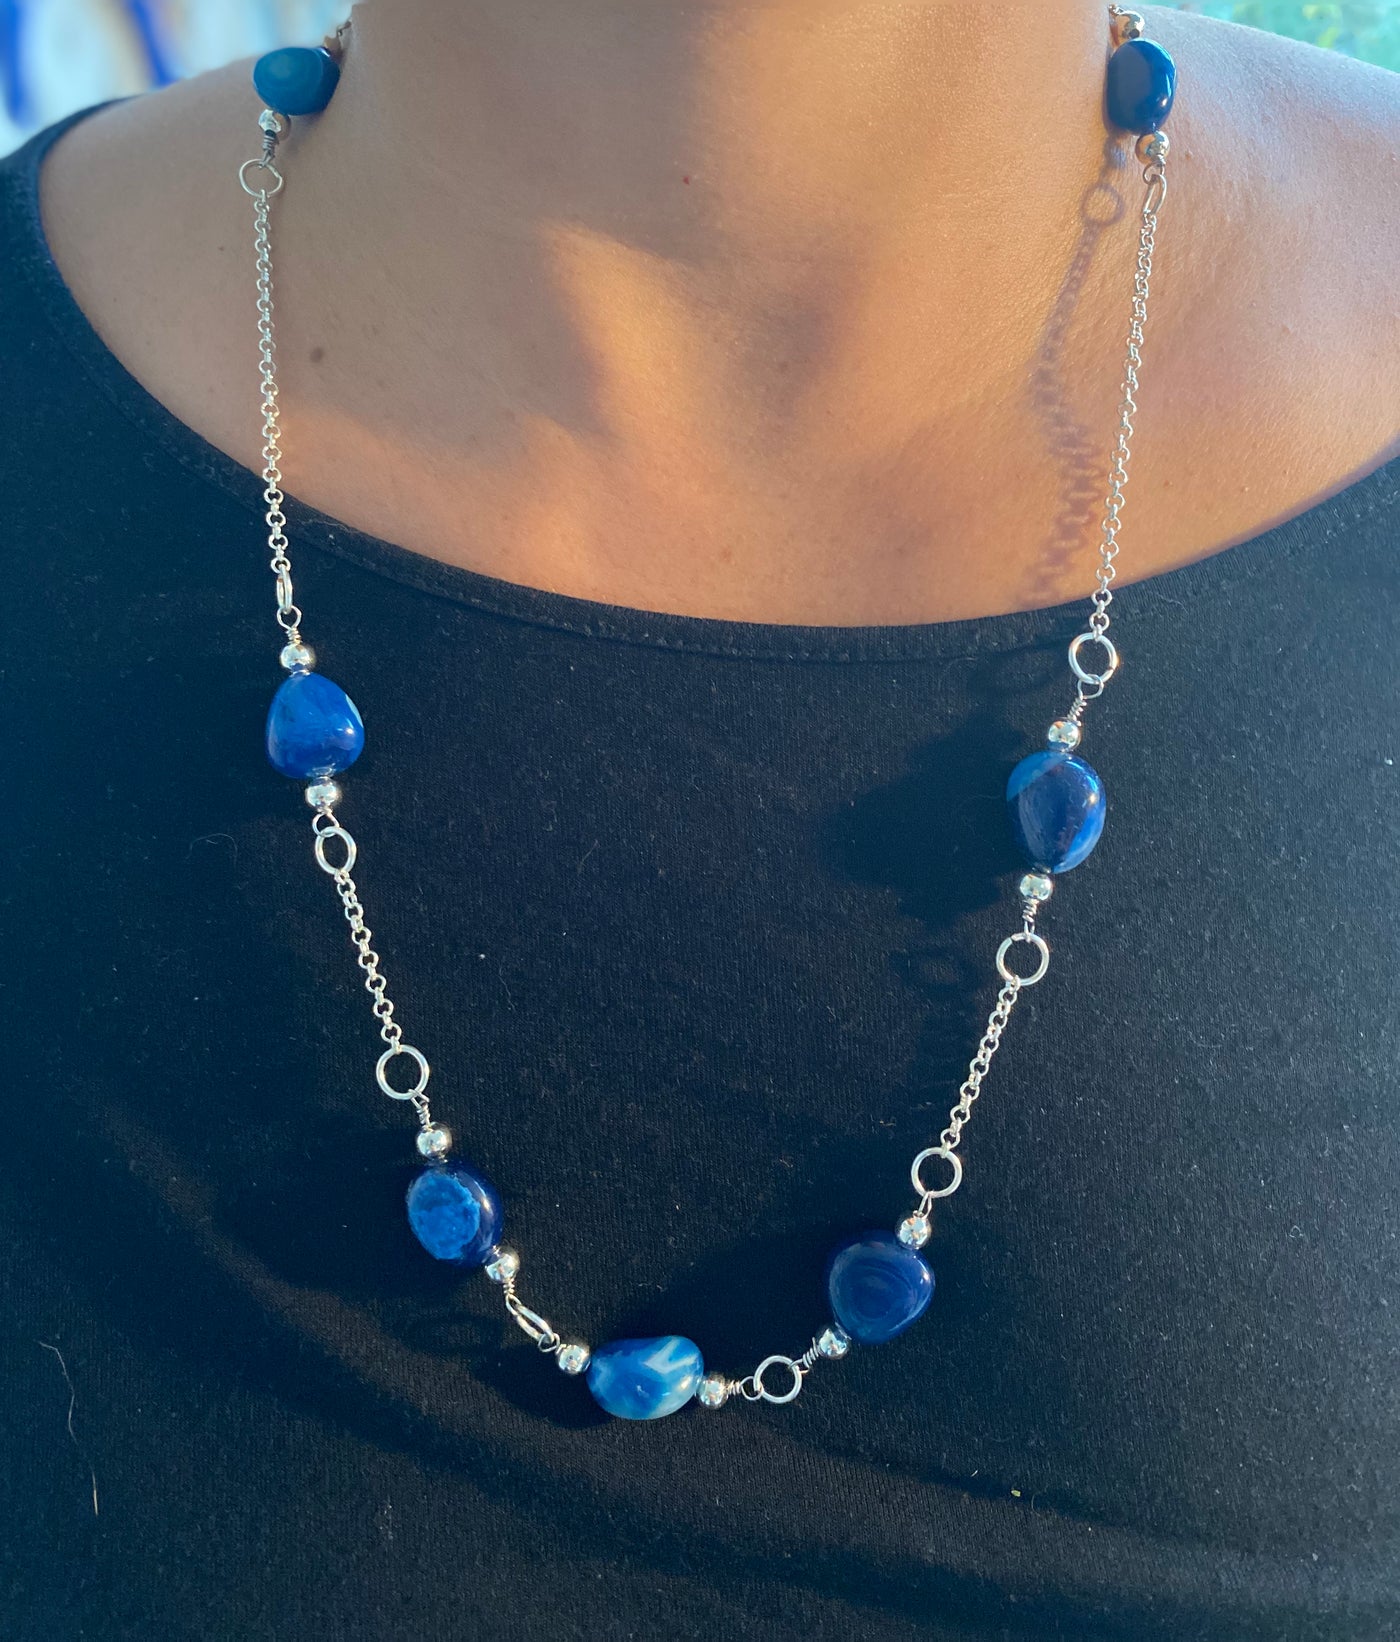 Necklace: Blue sapphire and silver chain